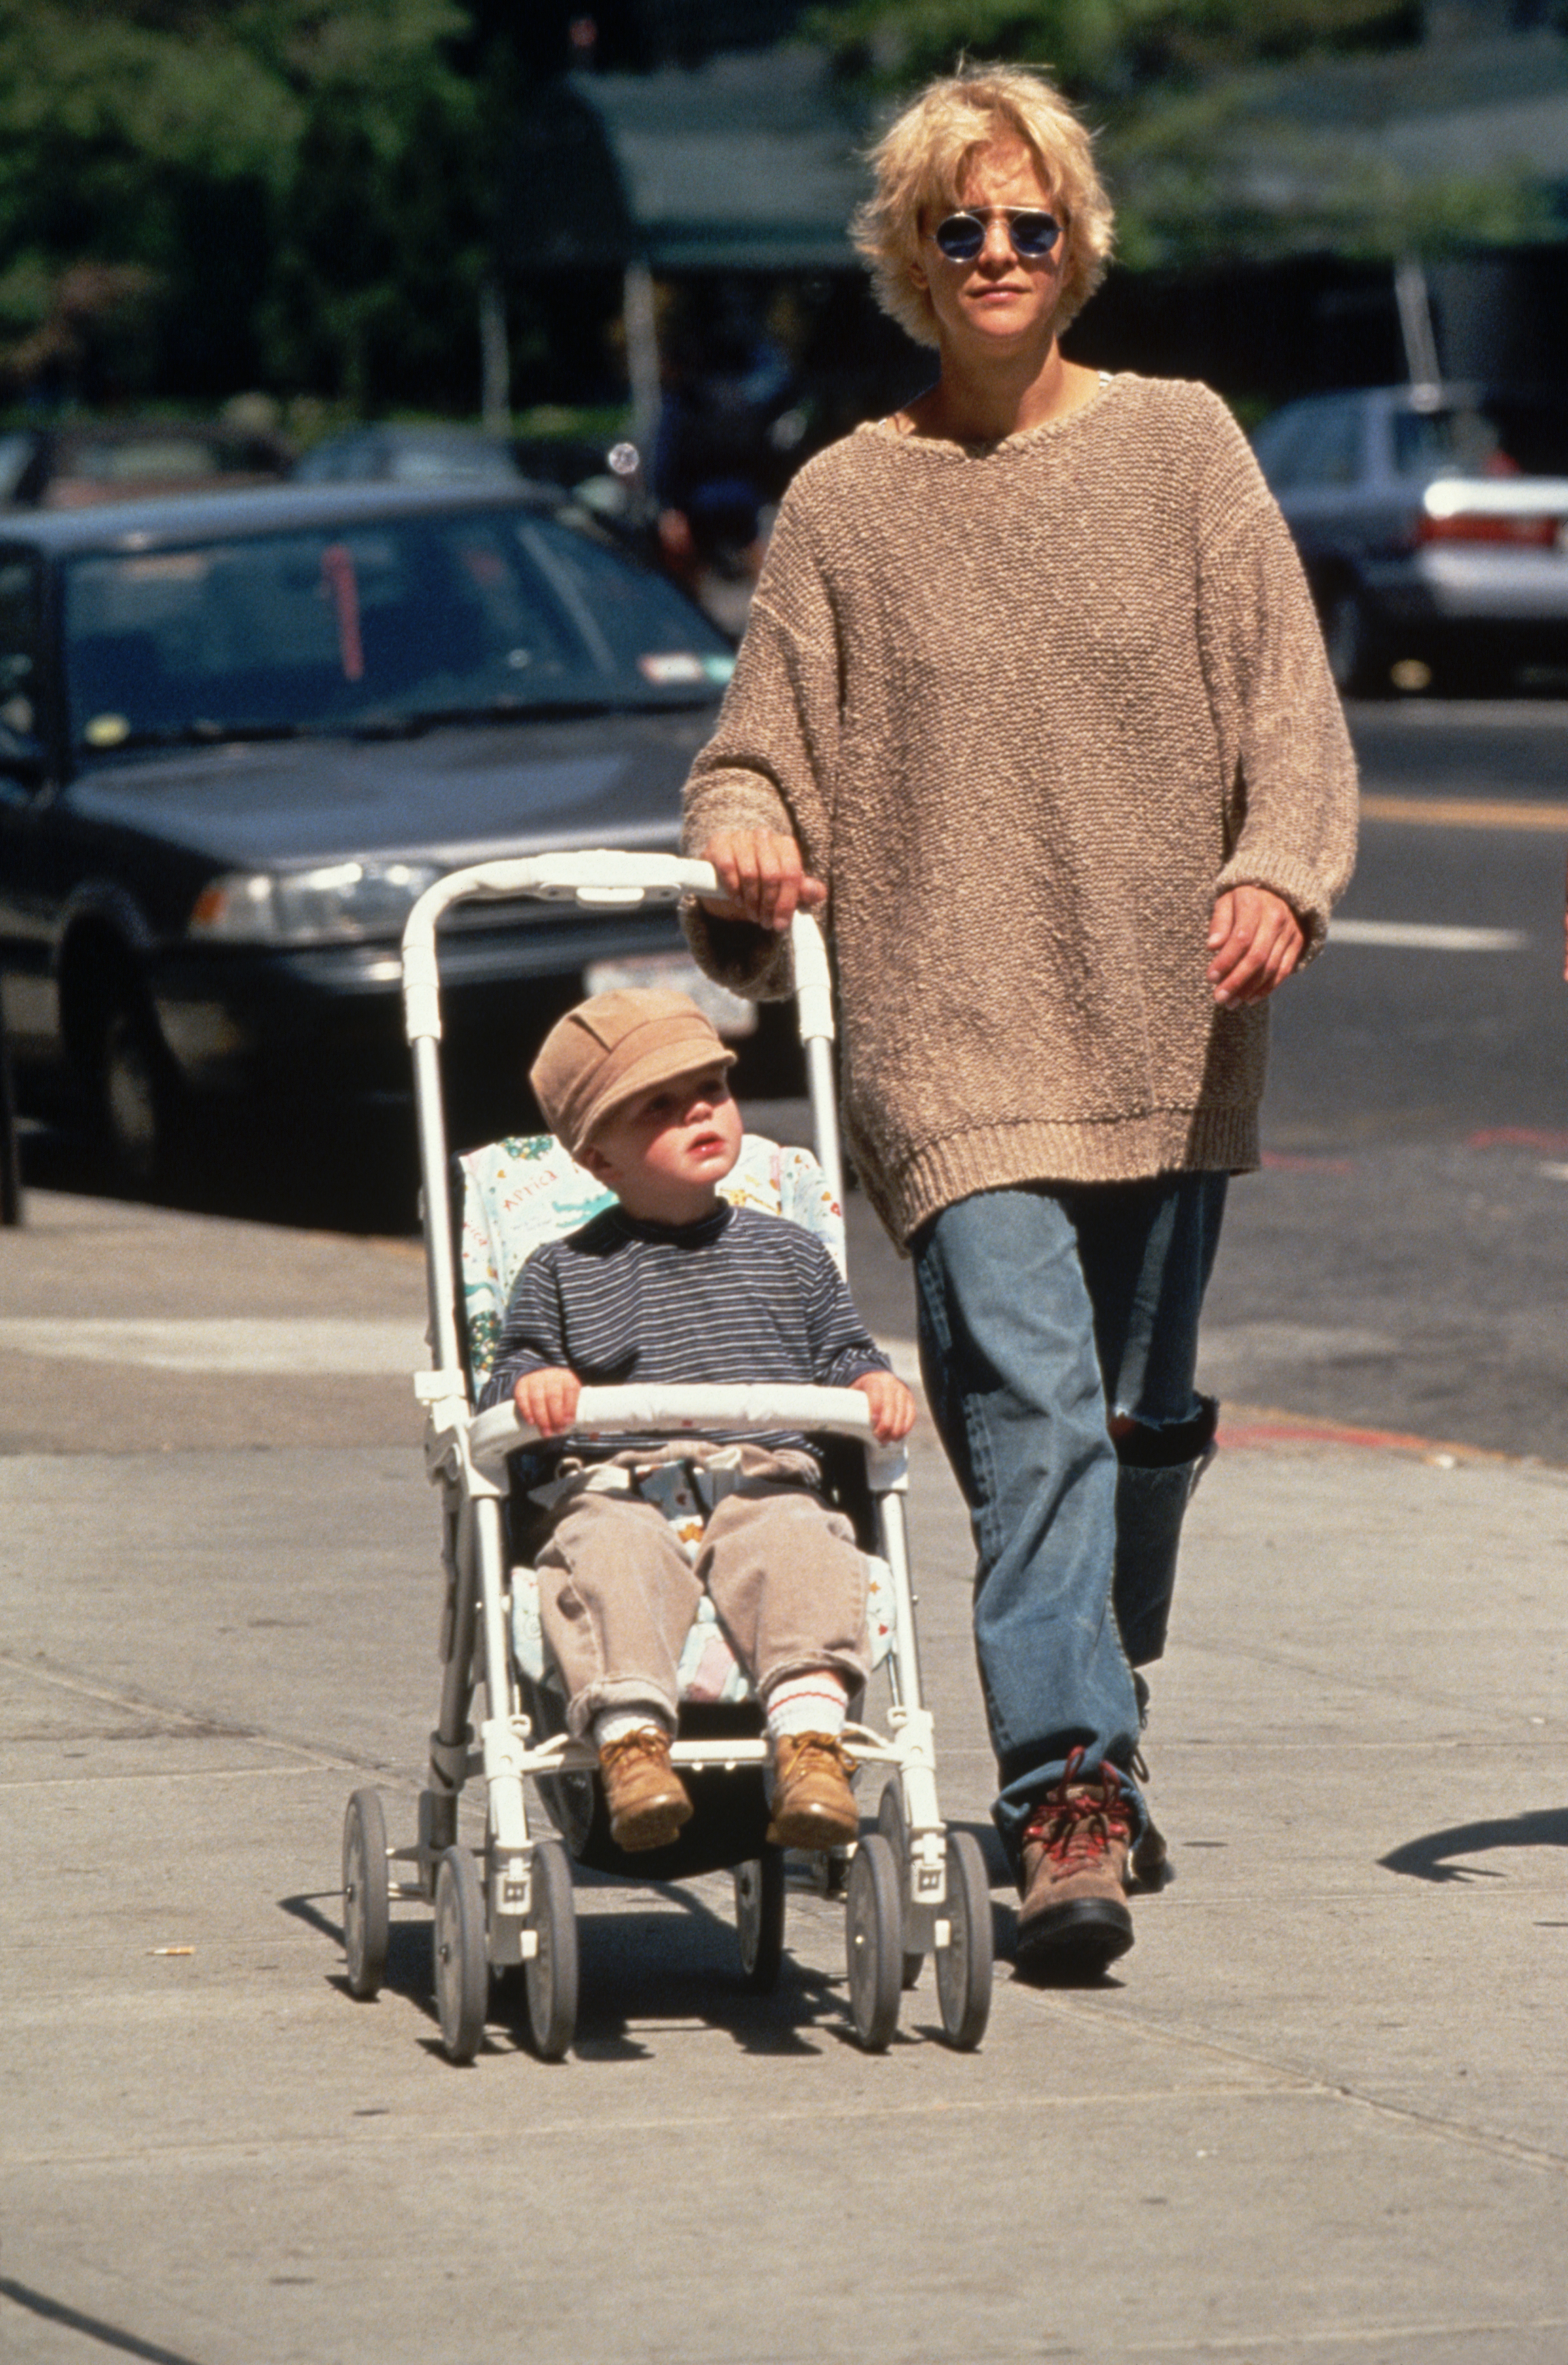 Meg Ryan with her son in a stroller in 1992 | Source: Getty Images